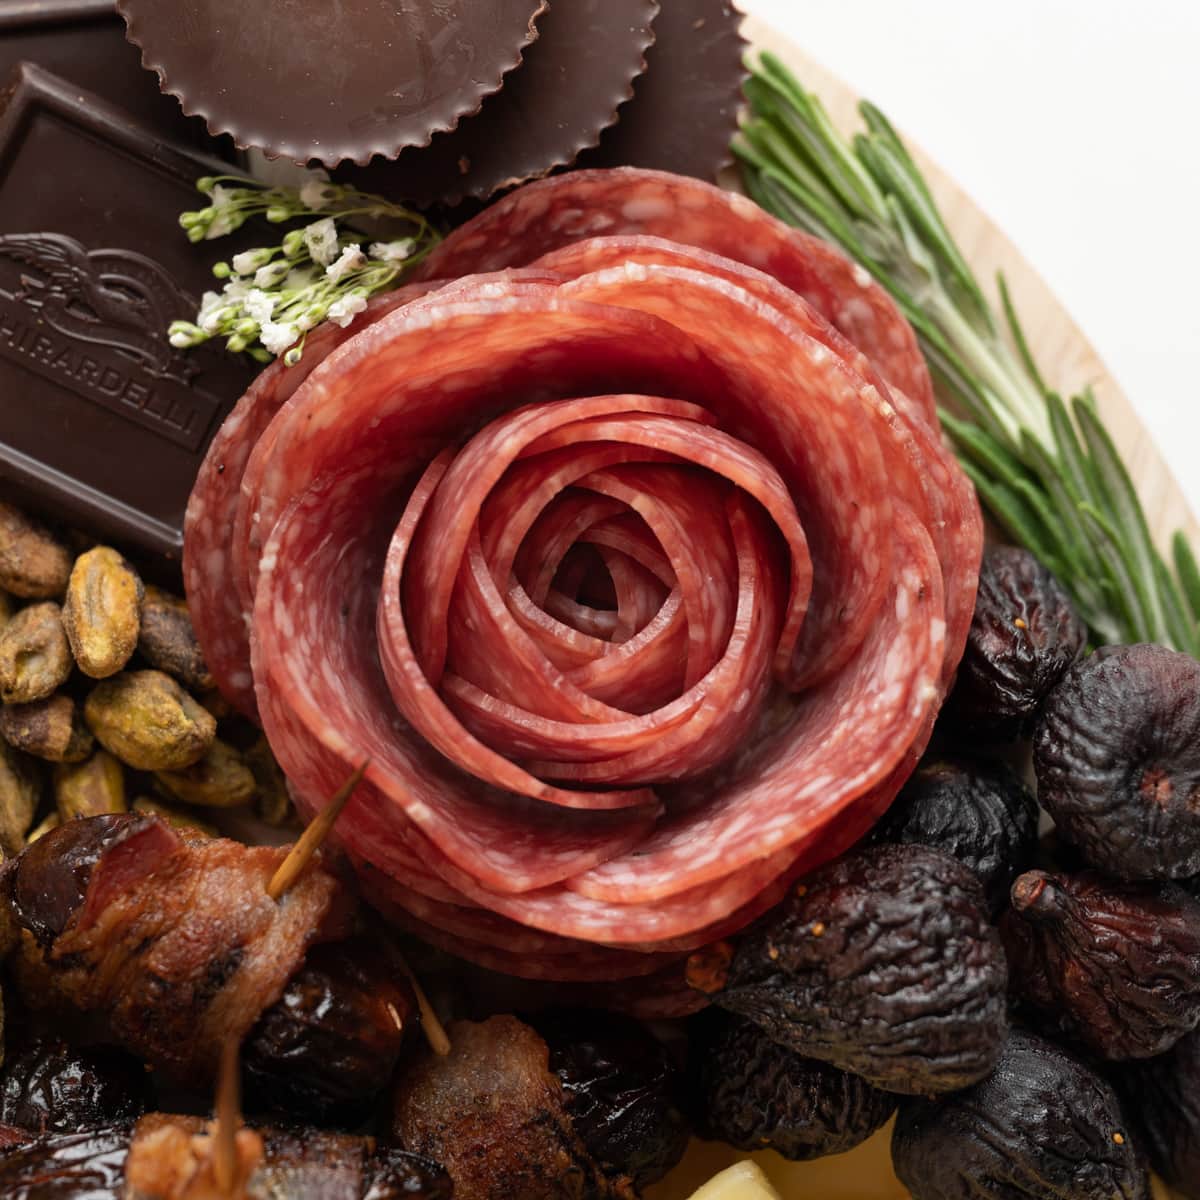 Salami Rose on a charcuterie board with dates, pistachios, dried figs, chocolate, babys breath, and rosemary